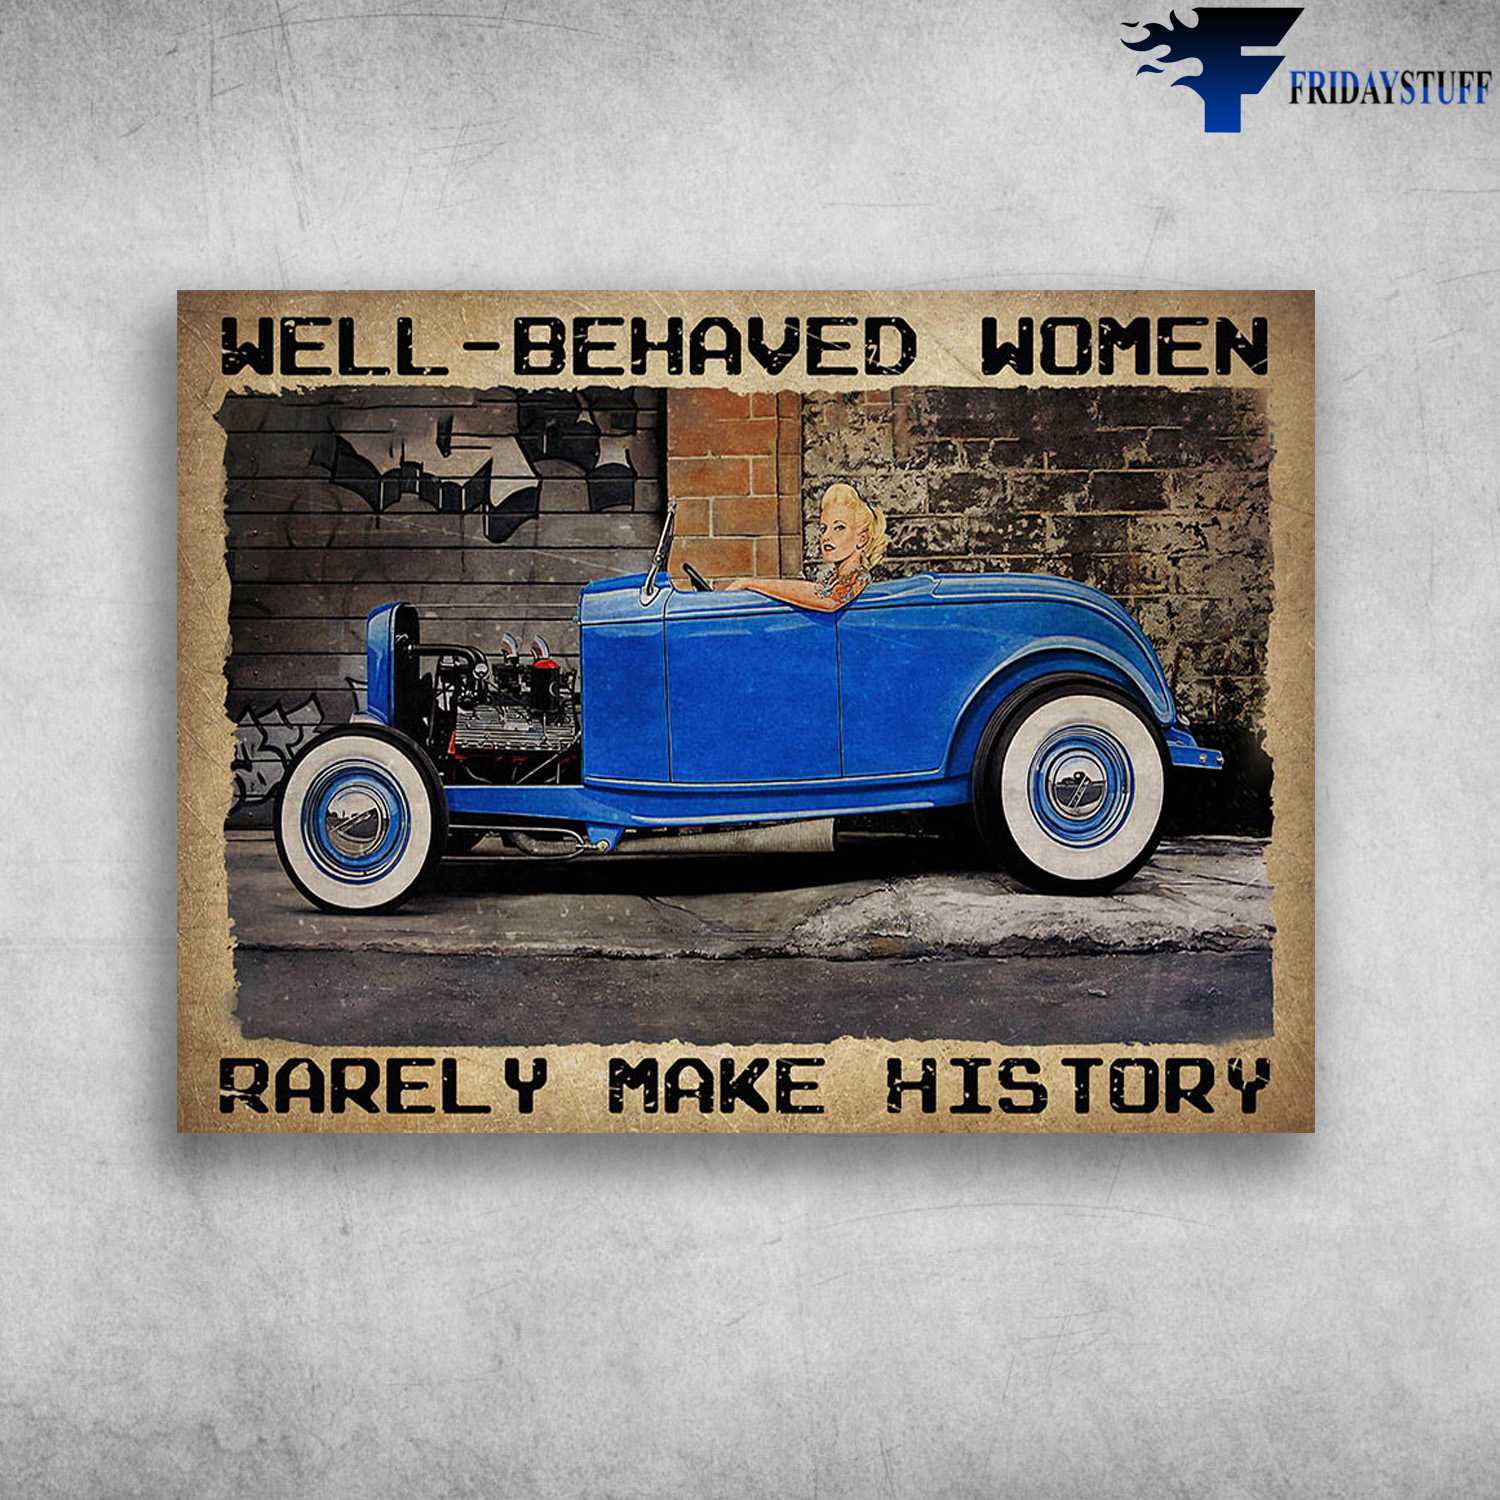 Hot Rod Riding, Lady Loves Car - Well-Behaved Woman, Rarely Make History